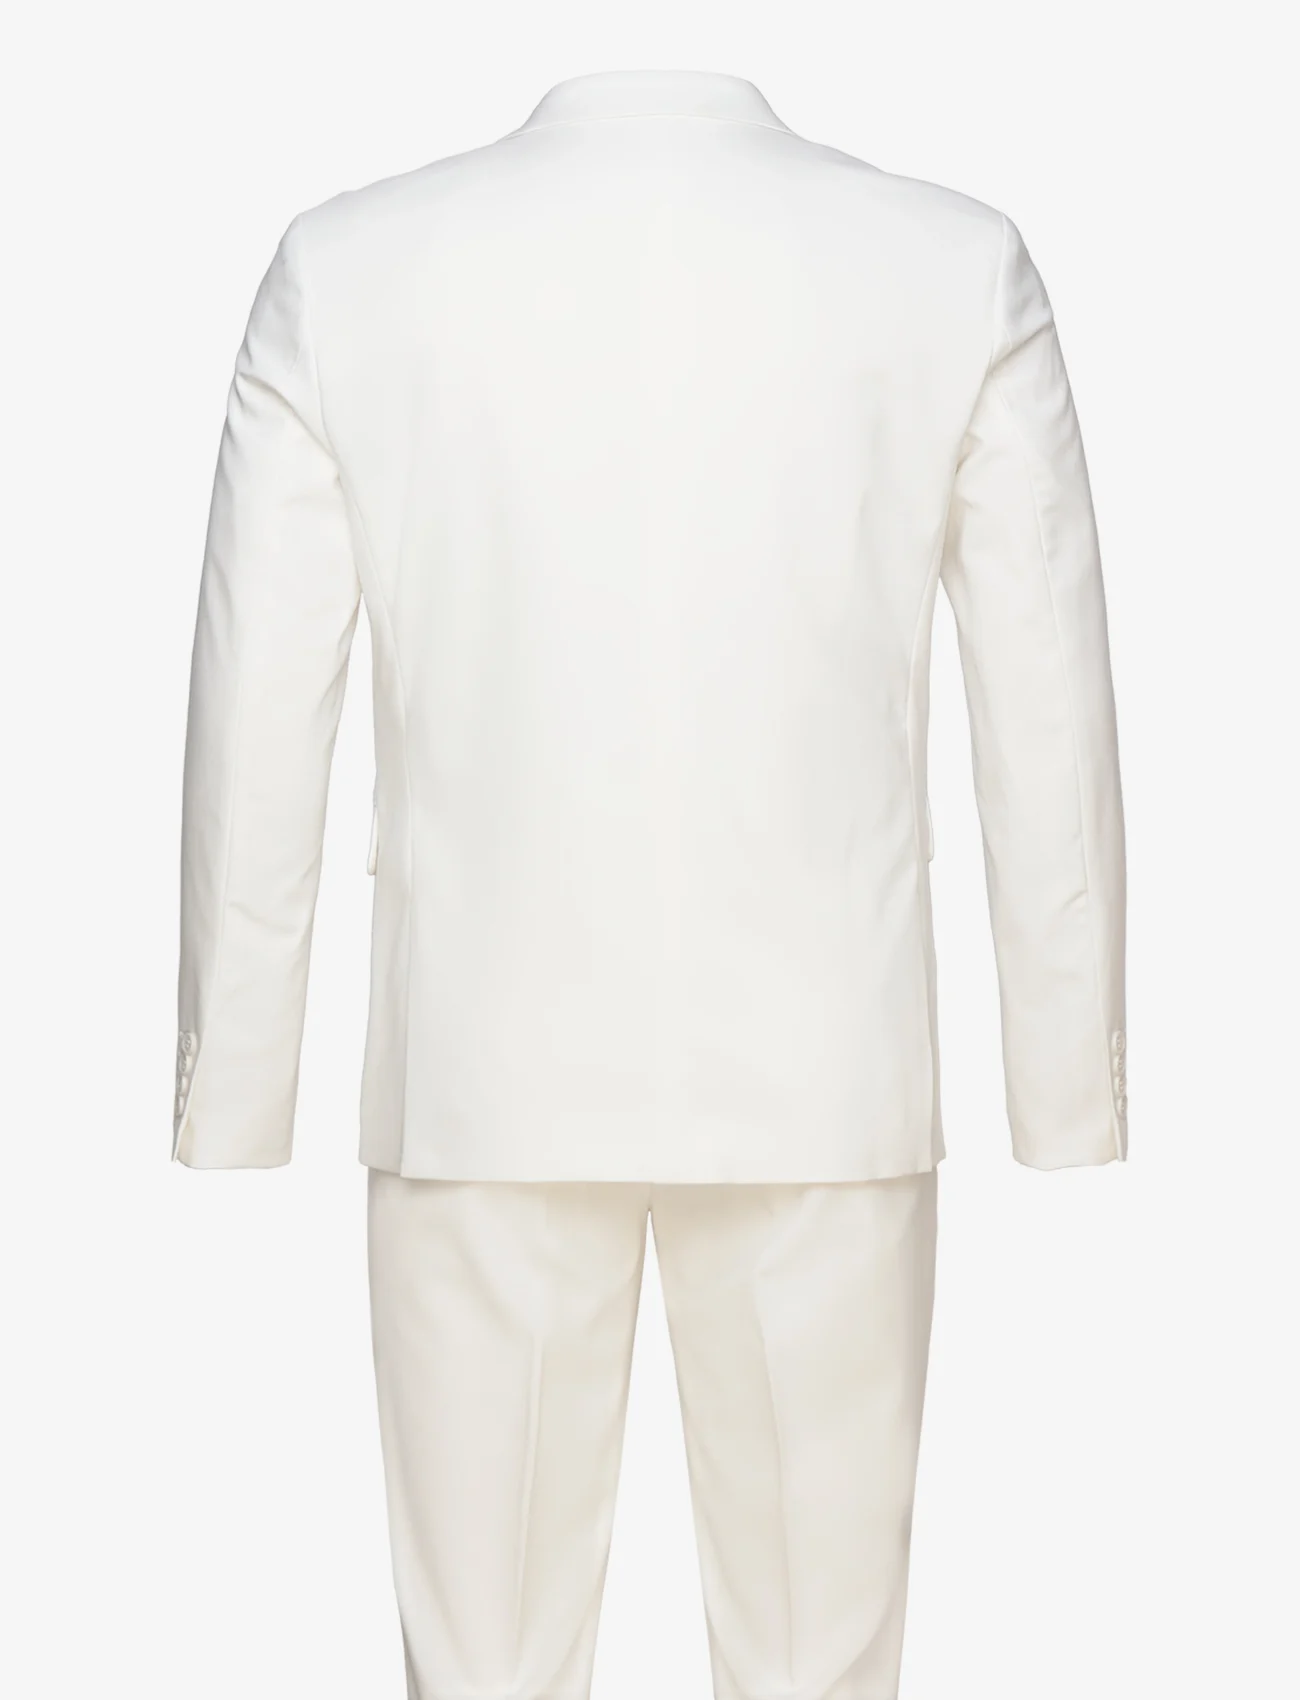 Lindbergh - Plain DB mens suit - normal lenght - double breasted suits - white - 1